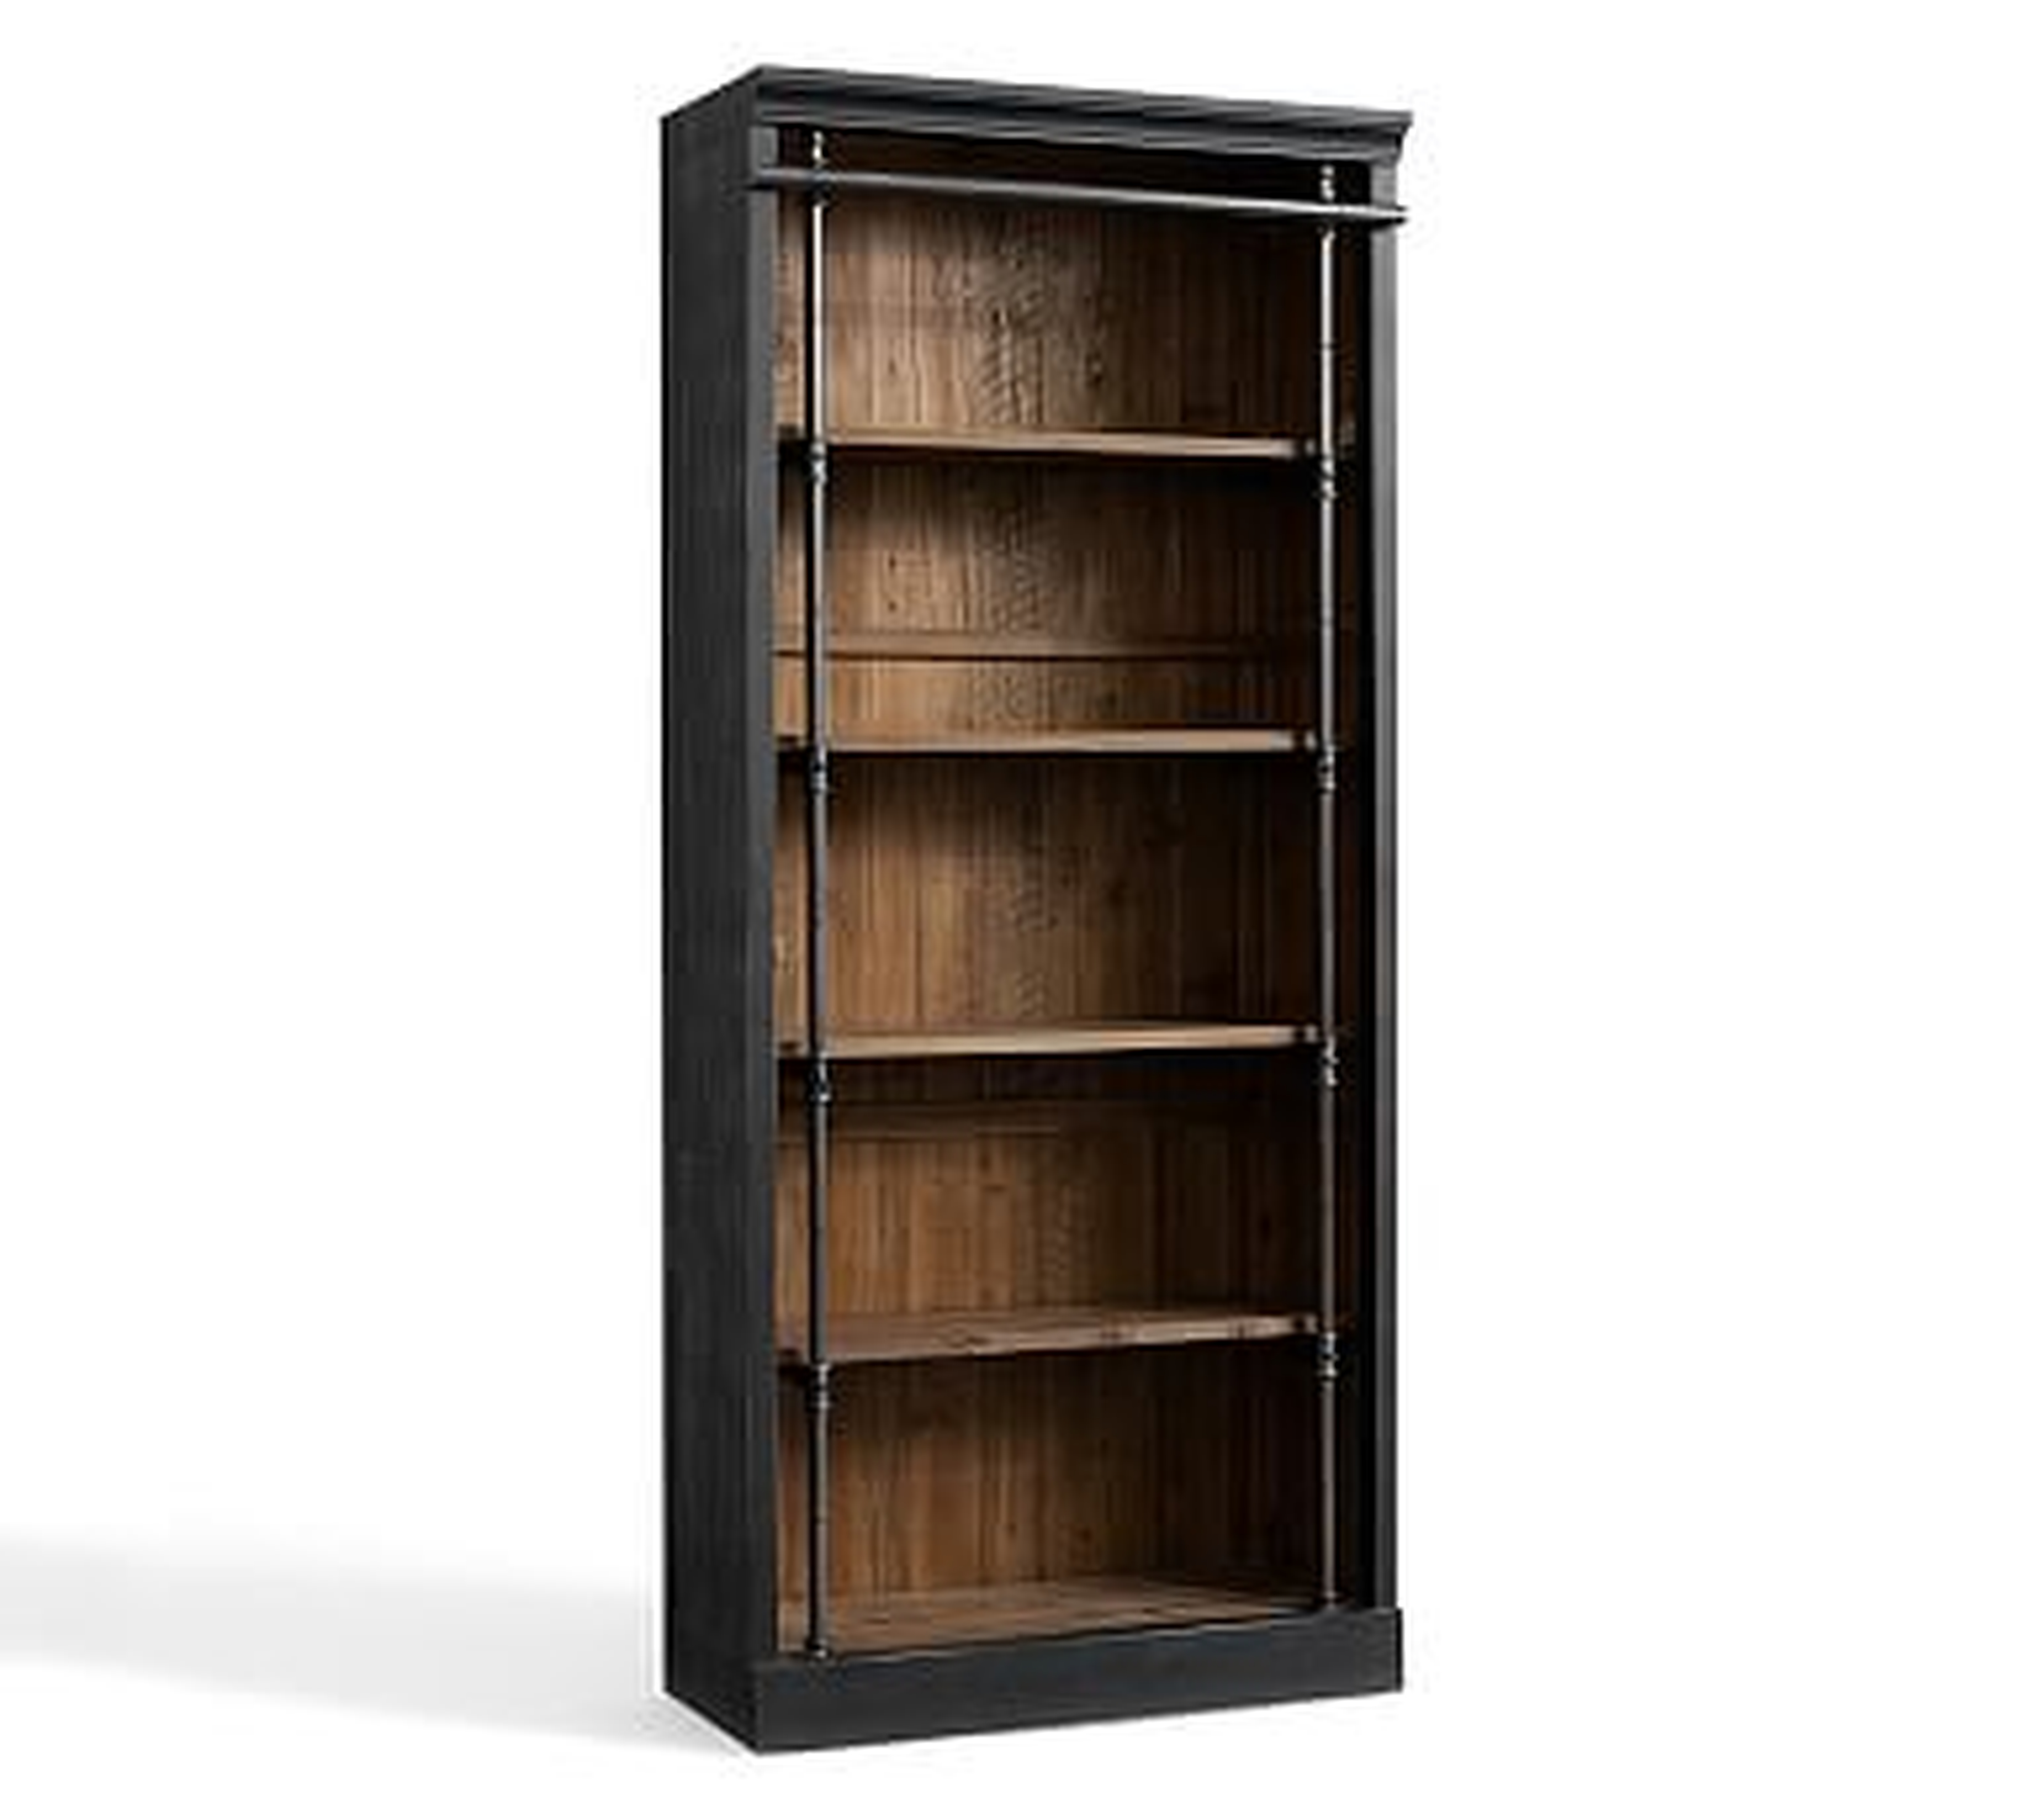 Gavin Reclaimed Wood Bookcase, Crafted Black/Natural Pine, 39.5"L x 90.5"H - Pottery Barn